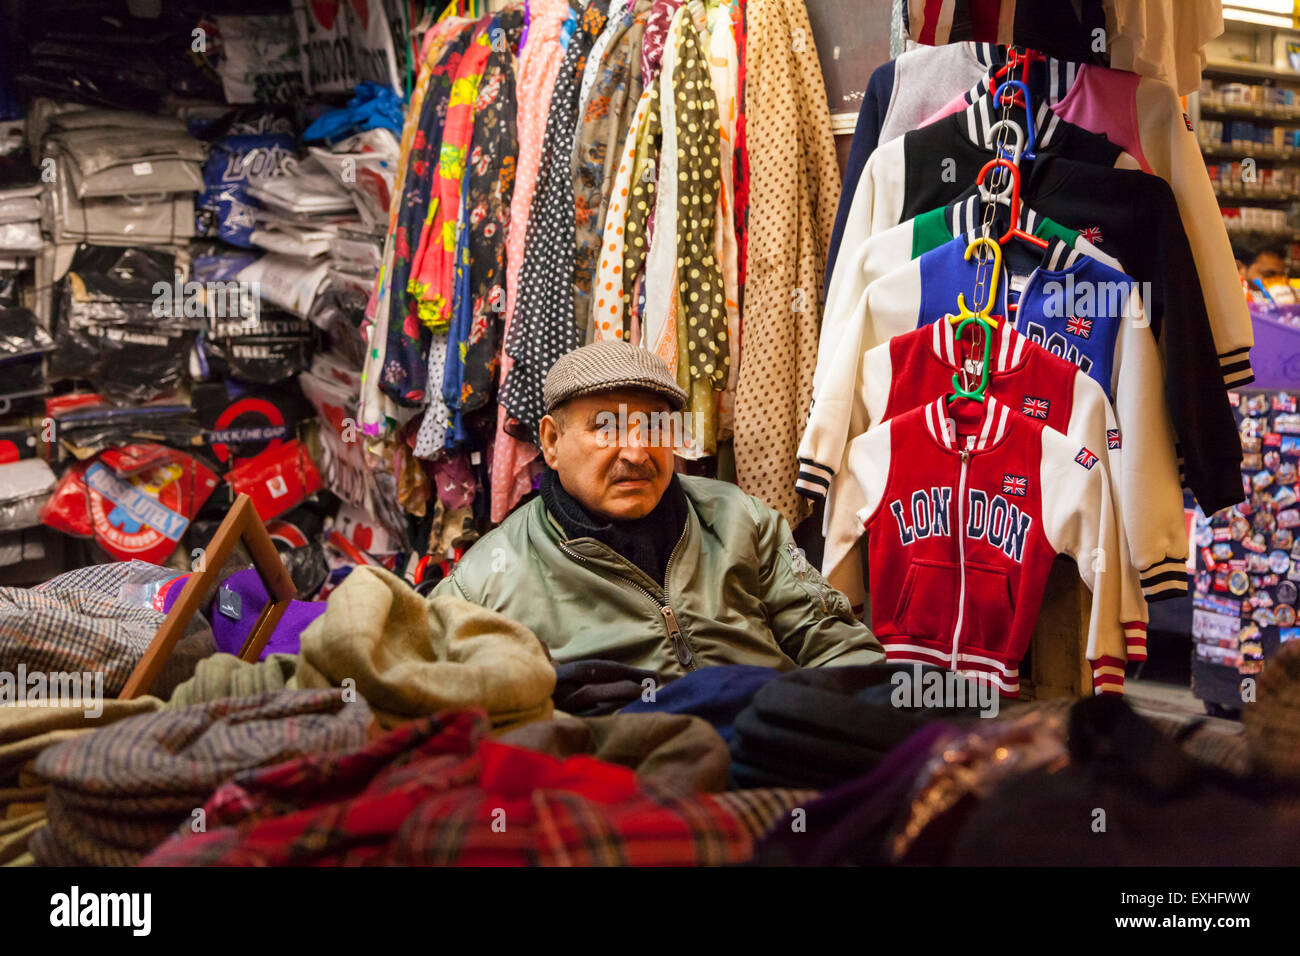 Stall holder in London's Covent Garden, selling souvenirs, hats, scarves and London branded clothing Stock Photo